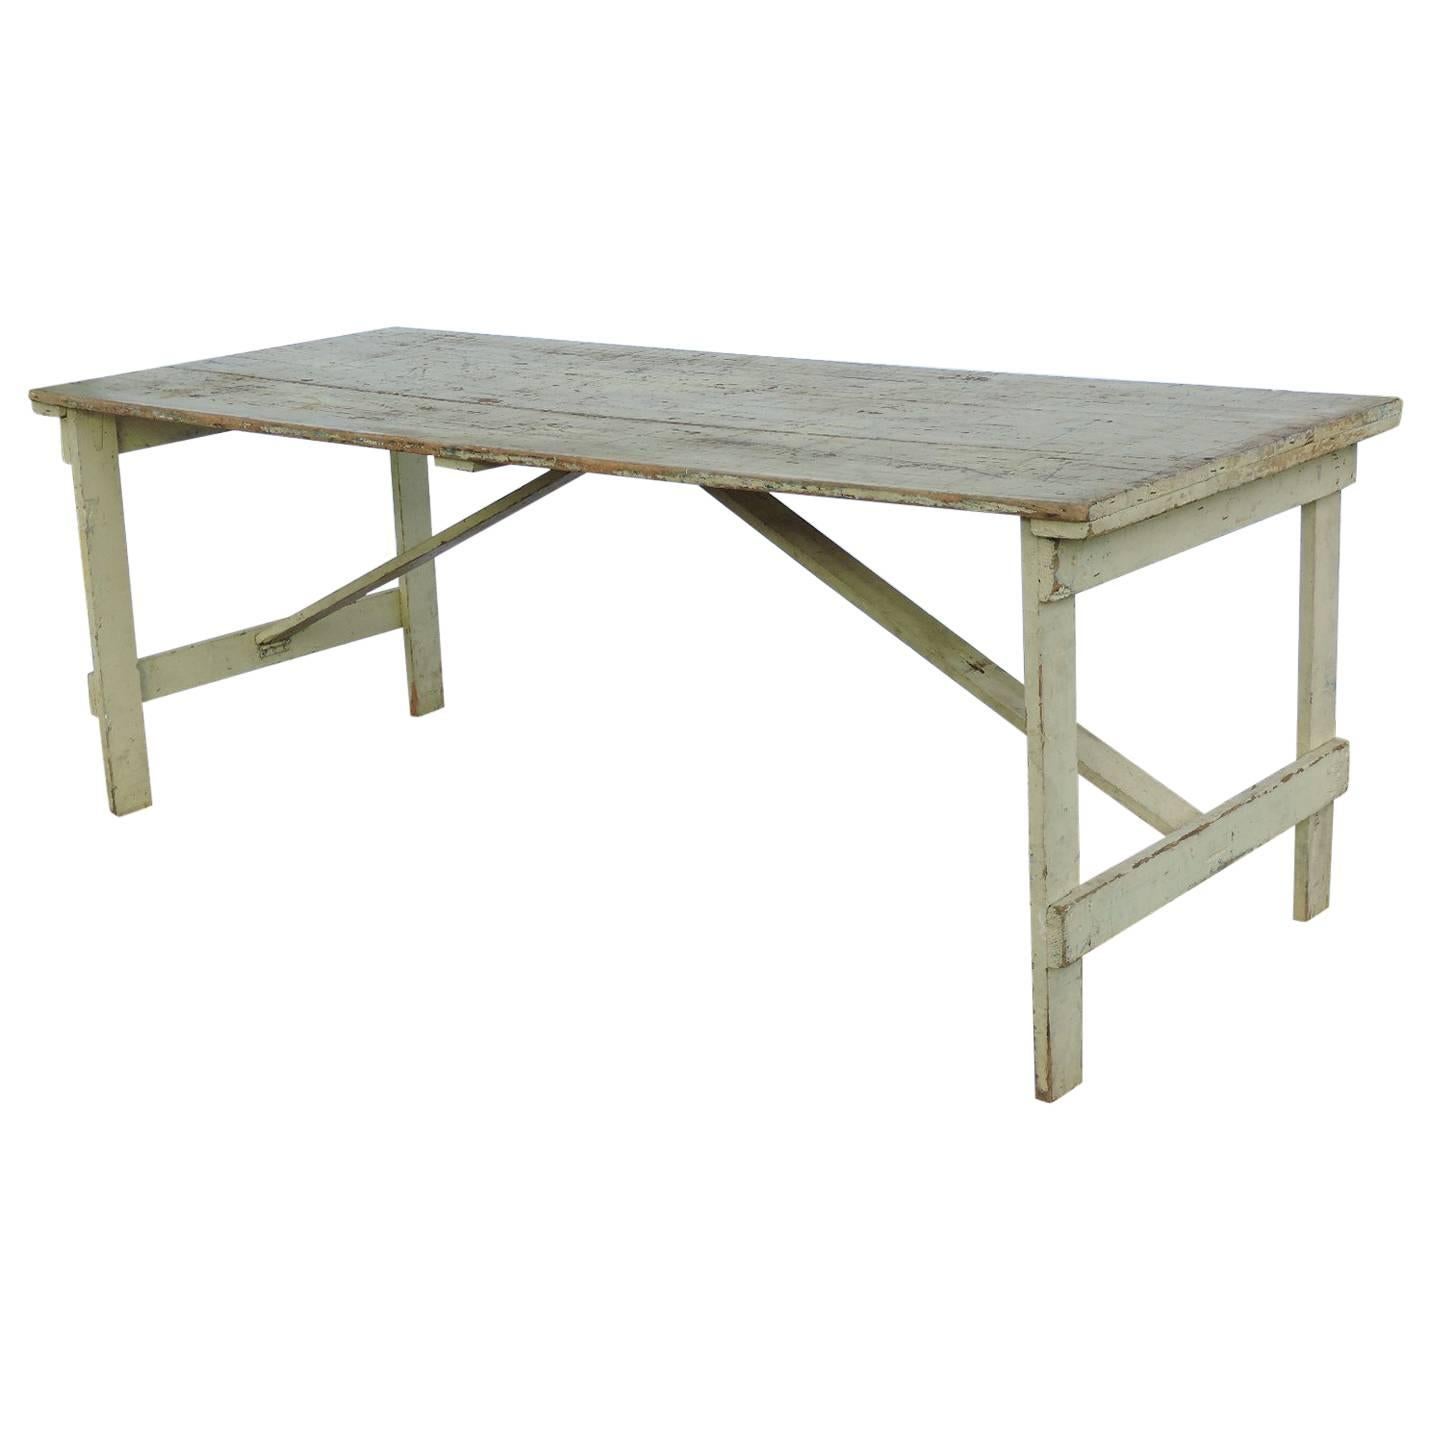  Collapsible Leg Rustic Farm Table in Old Pale Yellow Paint